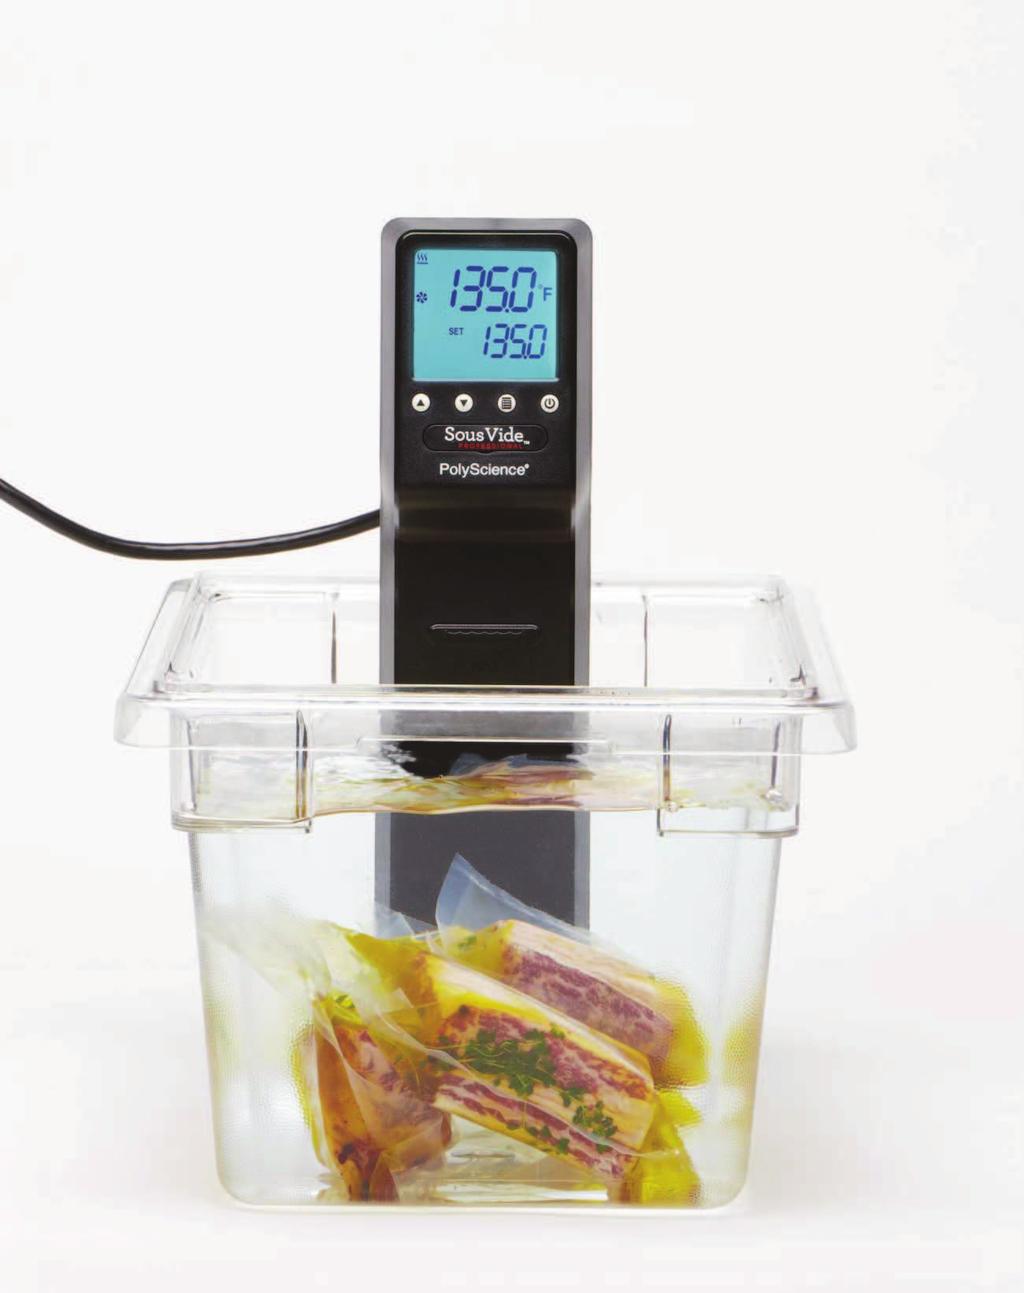 ECONOMY PRECISE TEMPERATURE COOKING SYSTEMS INCLUDES IMMERSION CIRCULATOR, TANK AND LID THE STANDARD OF TODAY S PROFESSIONAL KITCHEN Our economy systems provide total, cost effective solutions by